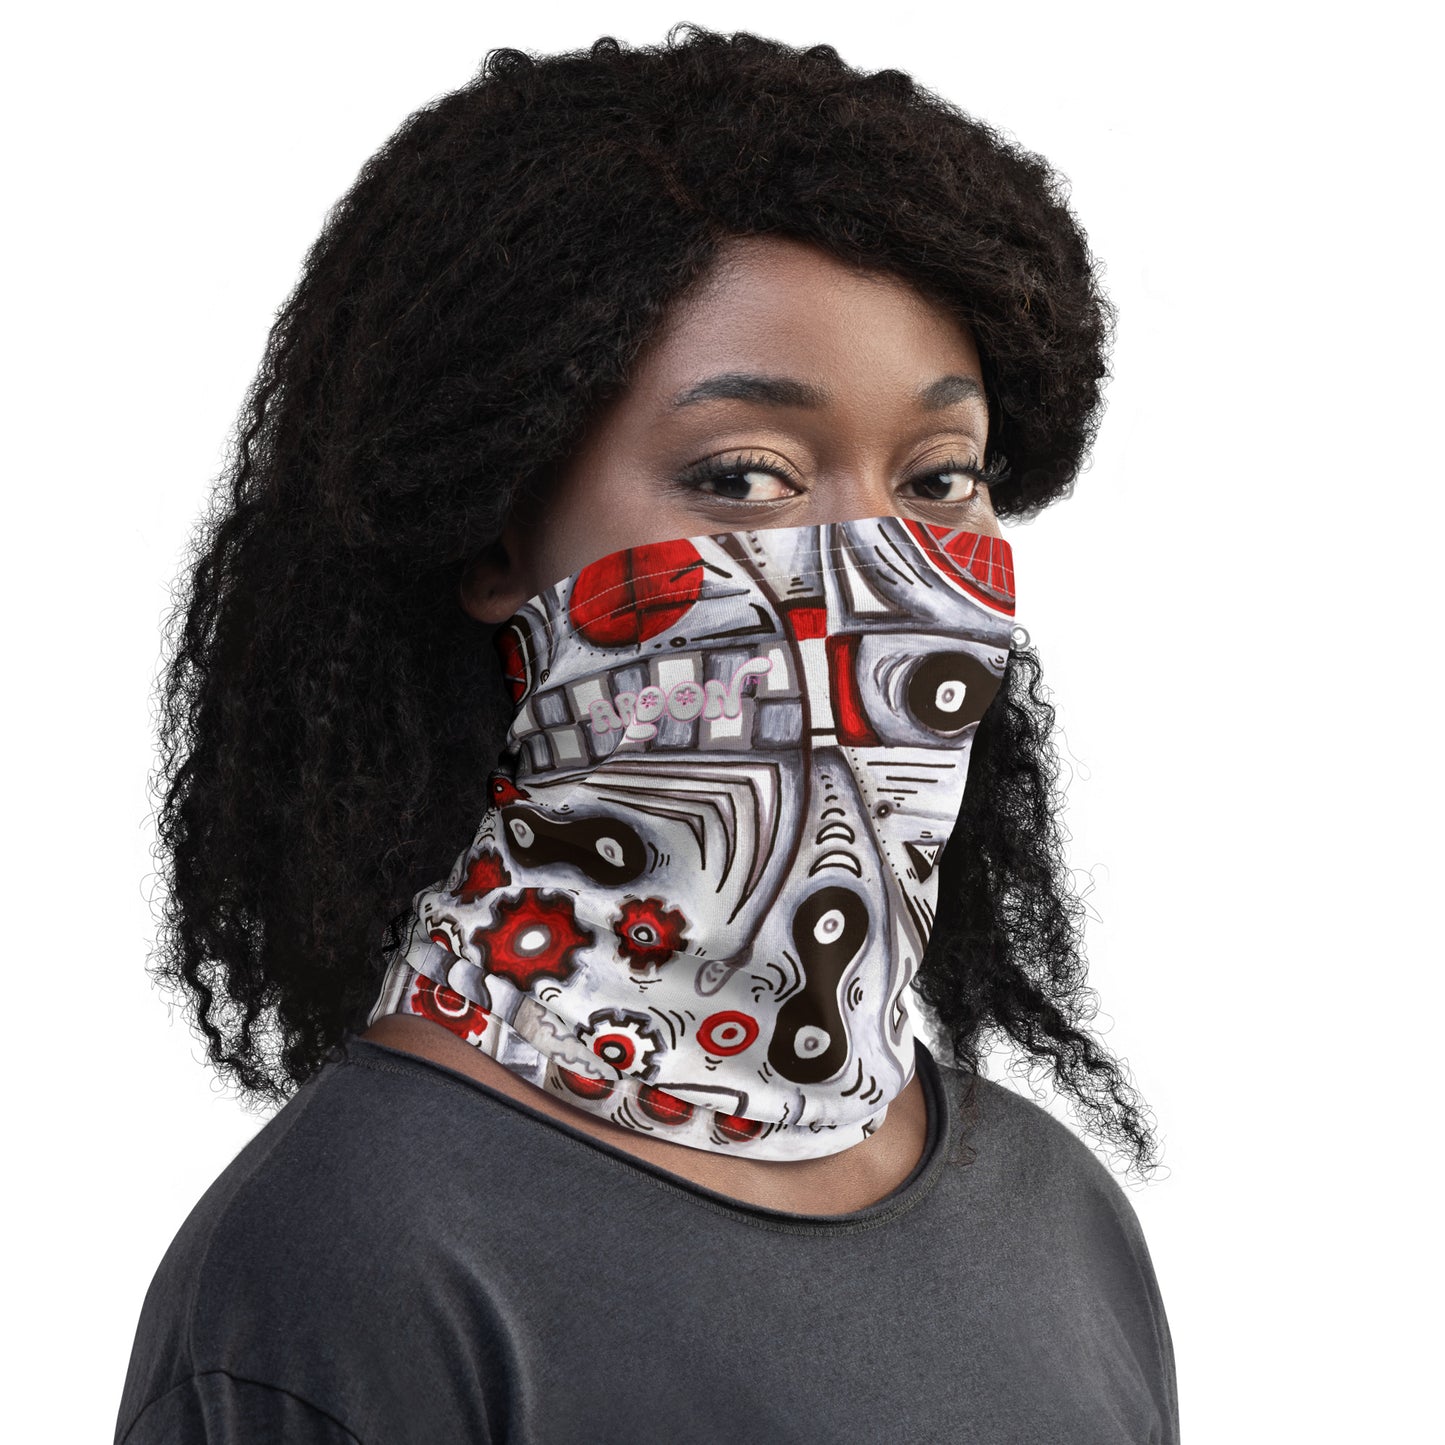 colorful and fun cycling biking neck gaiter in reds and whites. featuring gears and chains, perfect for the avid cycling enthusiasts for chilly rides, or to wear on a hike or anytime you  would wear a neck gaiter and want something fun and stylish! From the chic, modern cycling brand AROON